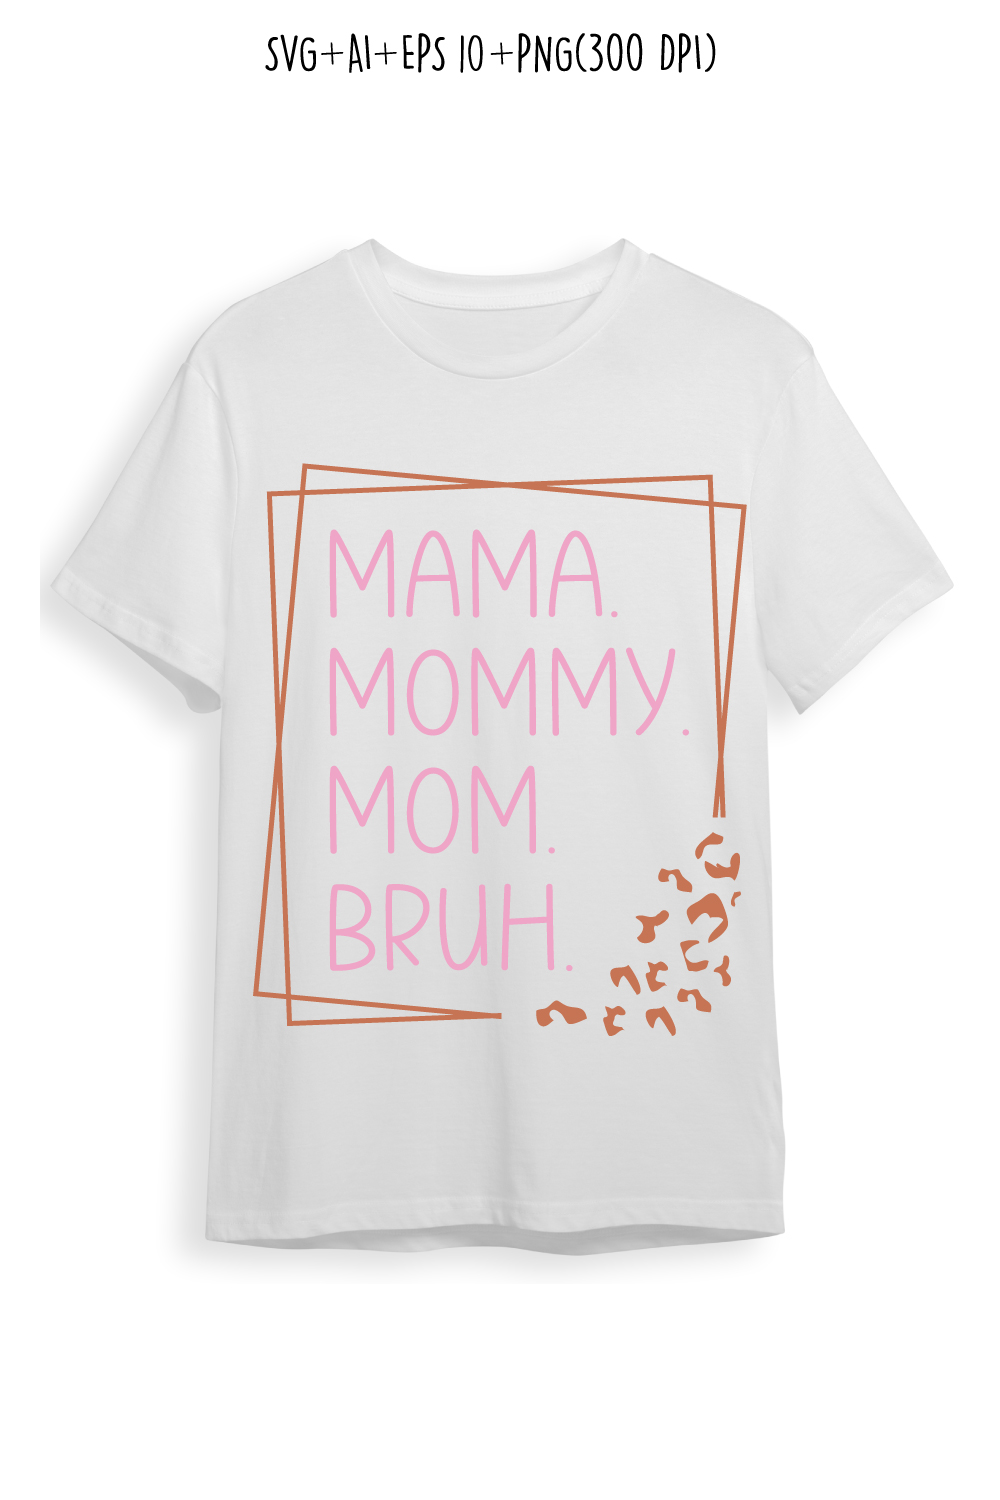 Mama Mommy Mom Bruh SVG T-Shirt Design Graphic by